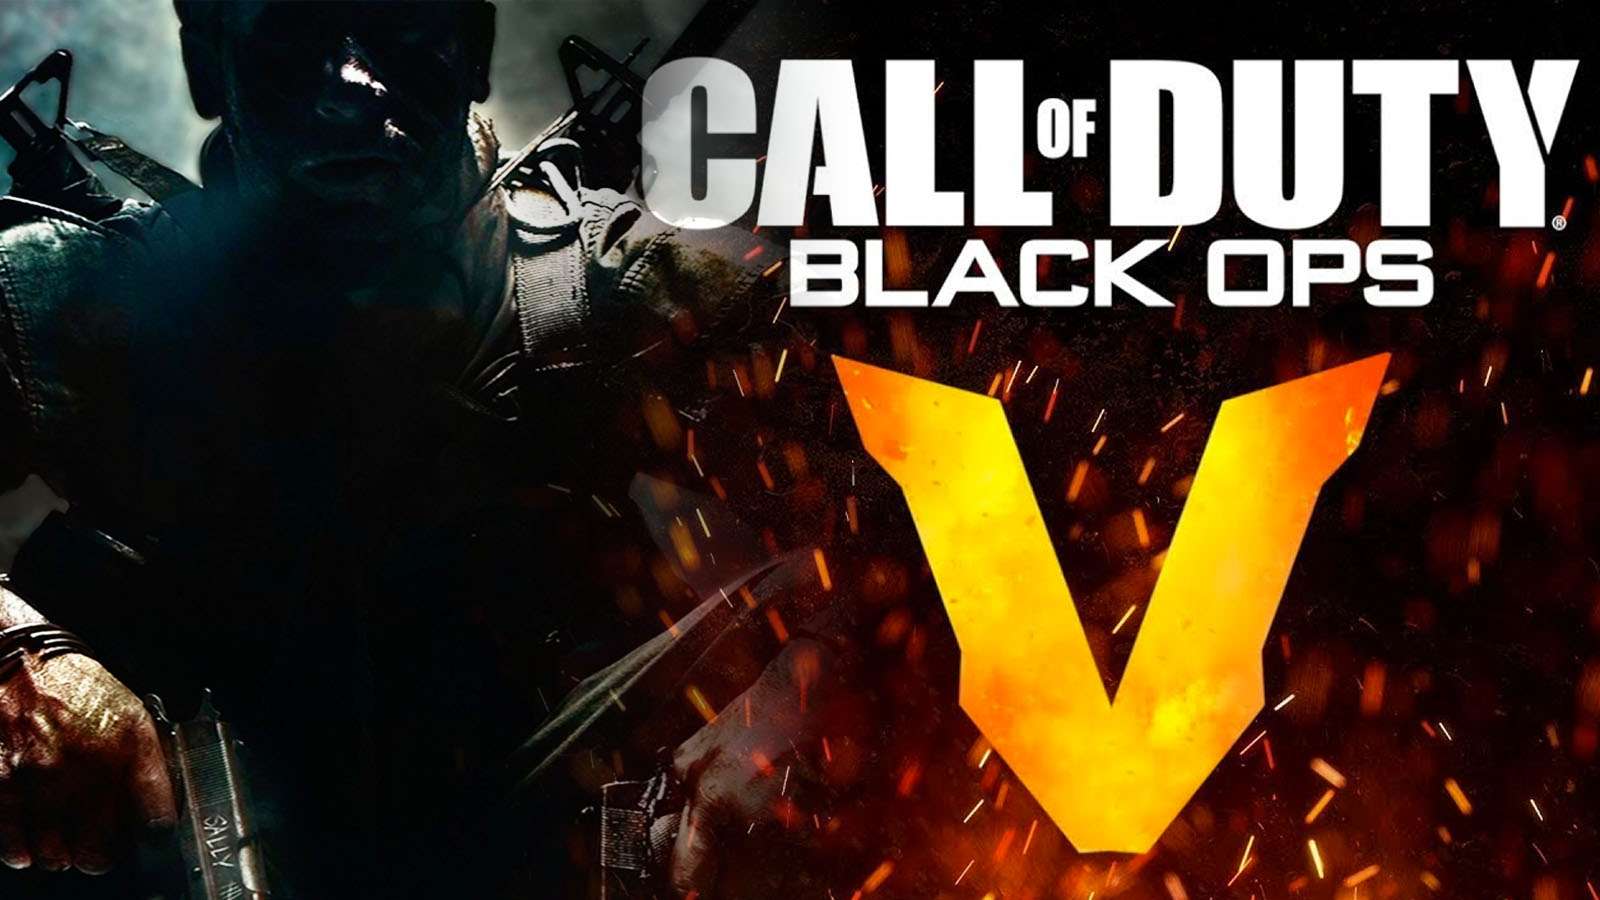 Call of Duty: Black Ops 2020 leaked: Multiplayer, zombies & campaign